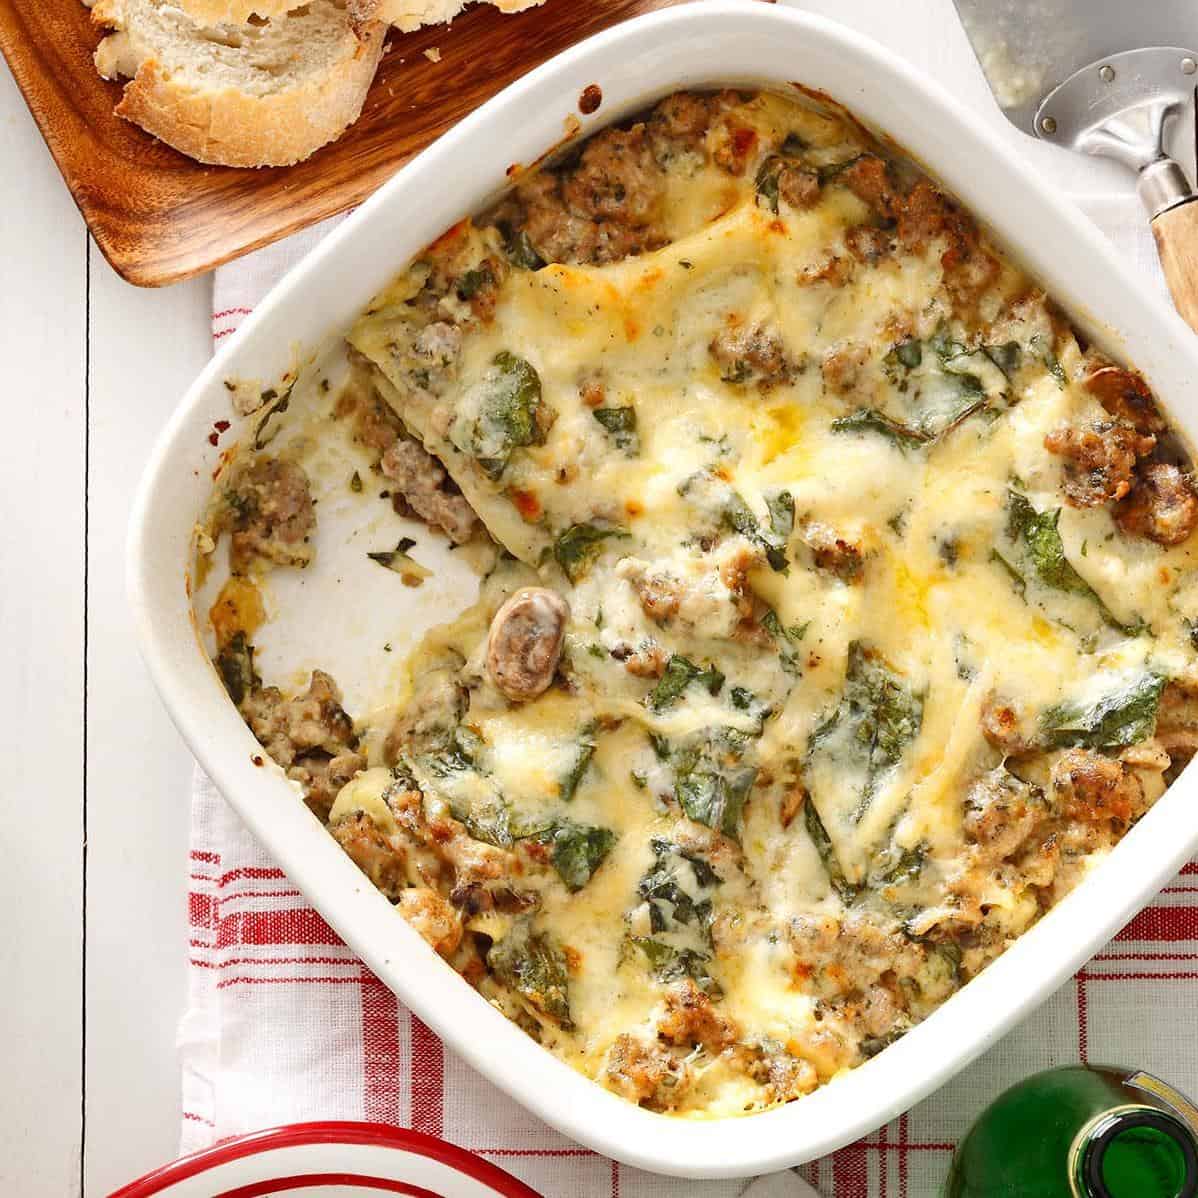  Who says lasagna has to be served in a pan?